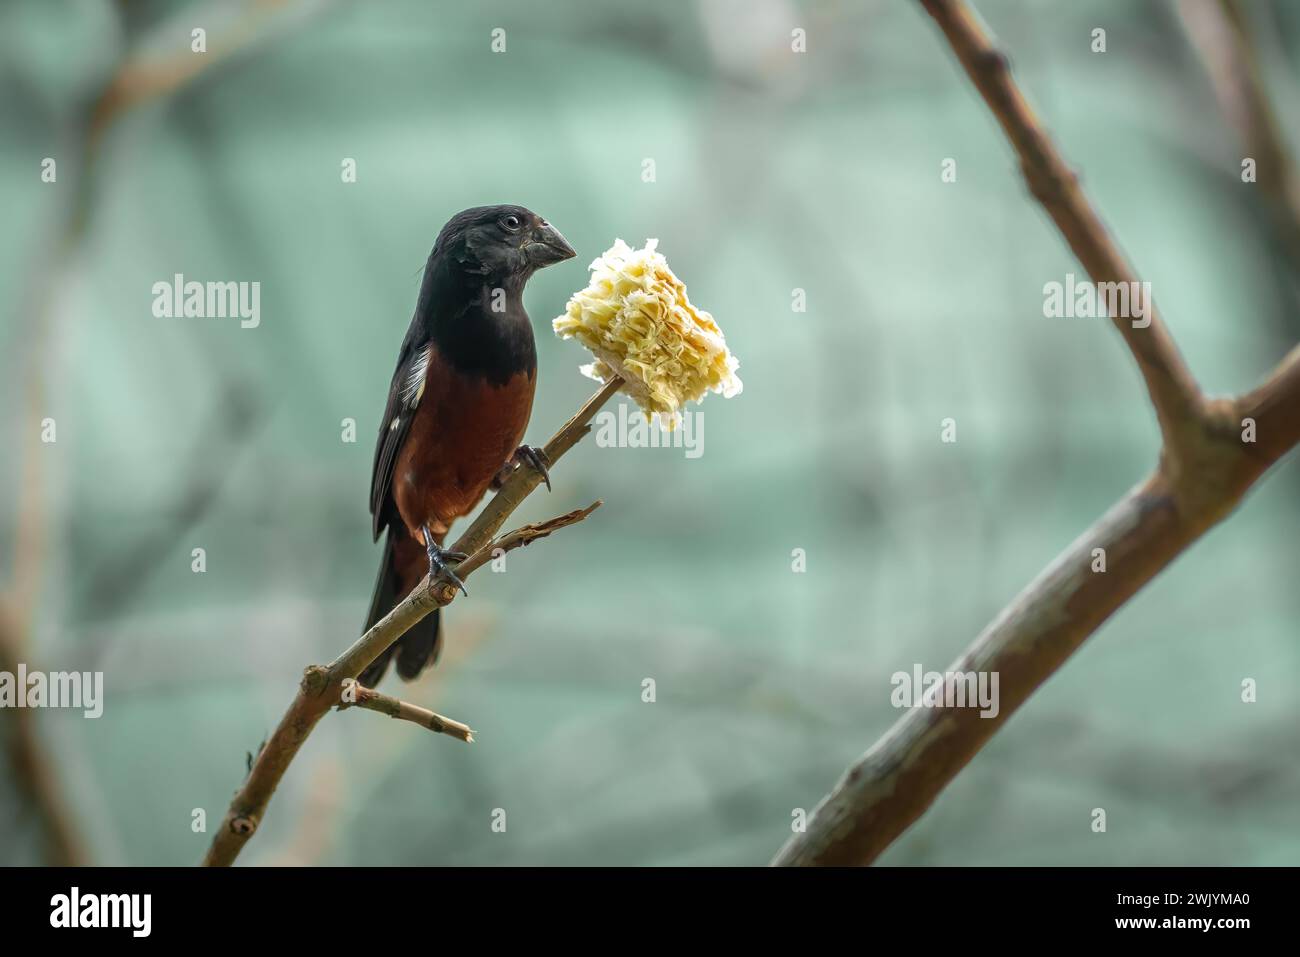 Male Chestnut-bellied Seed Finch (Sporophila angolensis) Stock Photo